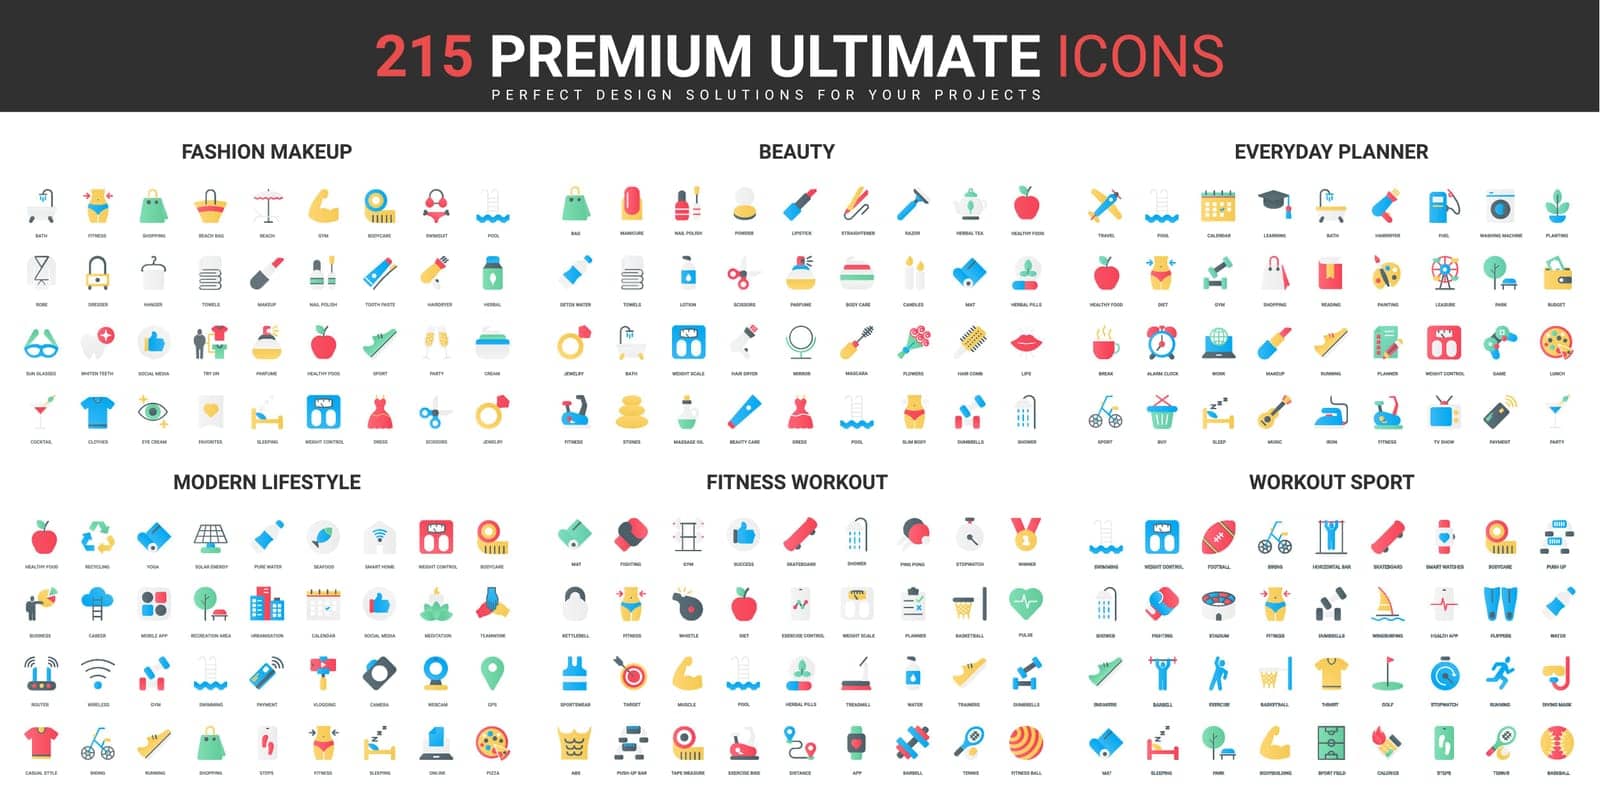 Beauty, sport exercises for healthy modern lifestyle and leisure color flat icons set by Lembergvector